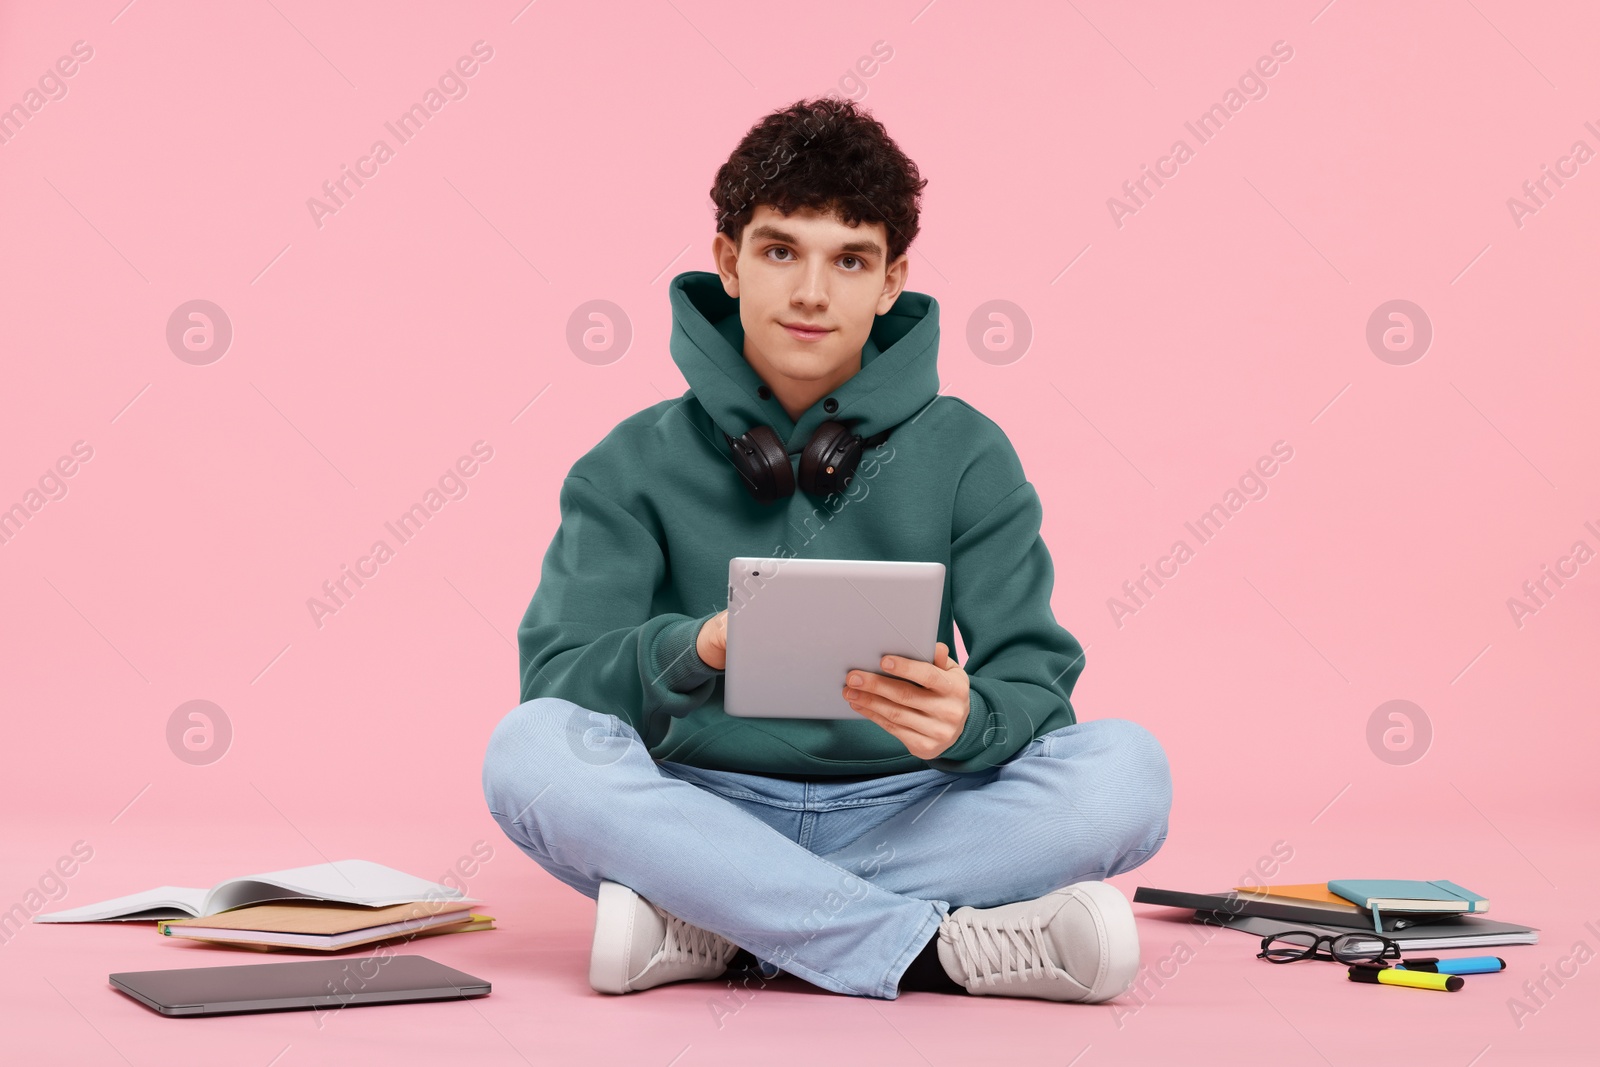 Photo of Portrait of student with tablet and stationery sitting on pink background